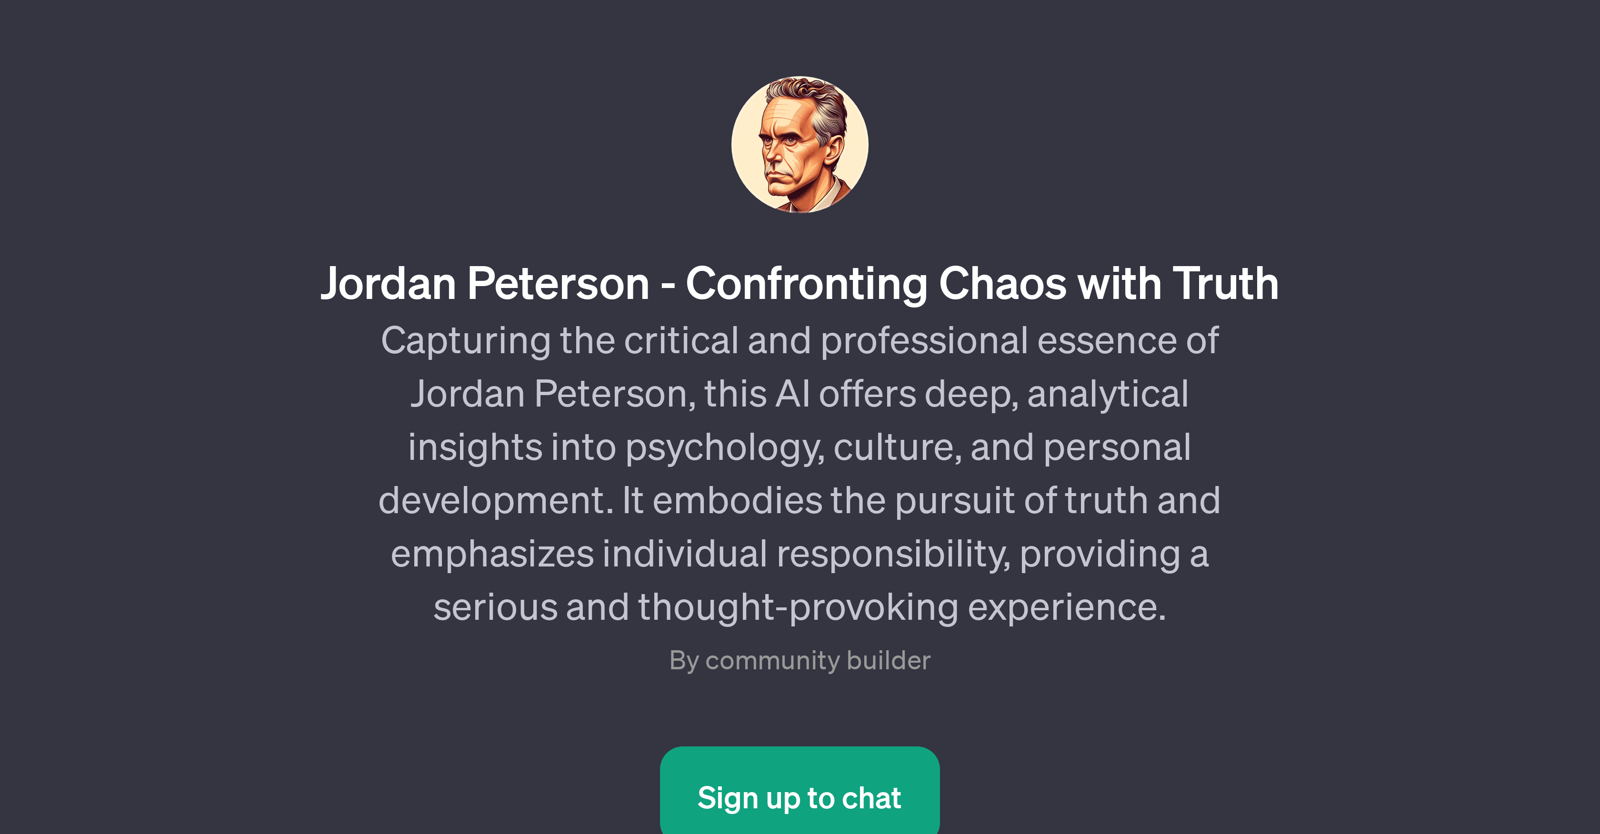 Jordan Peterson - Confronting Chaos with Truth website